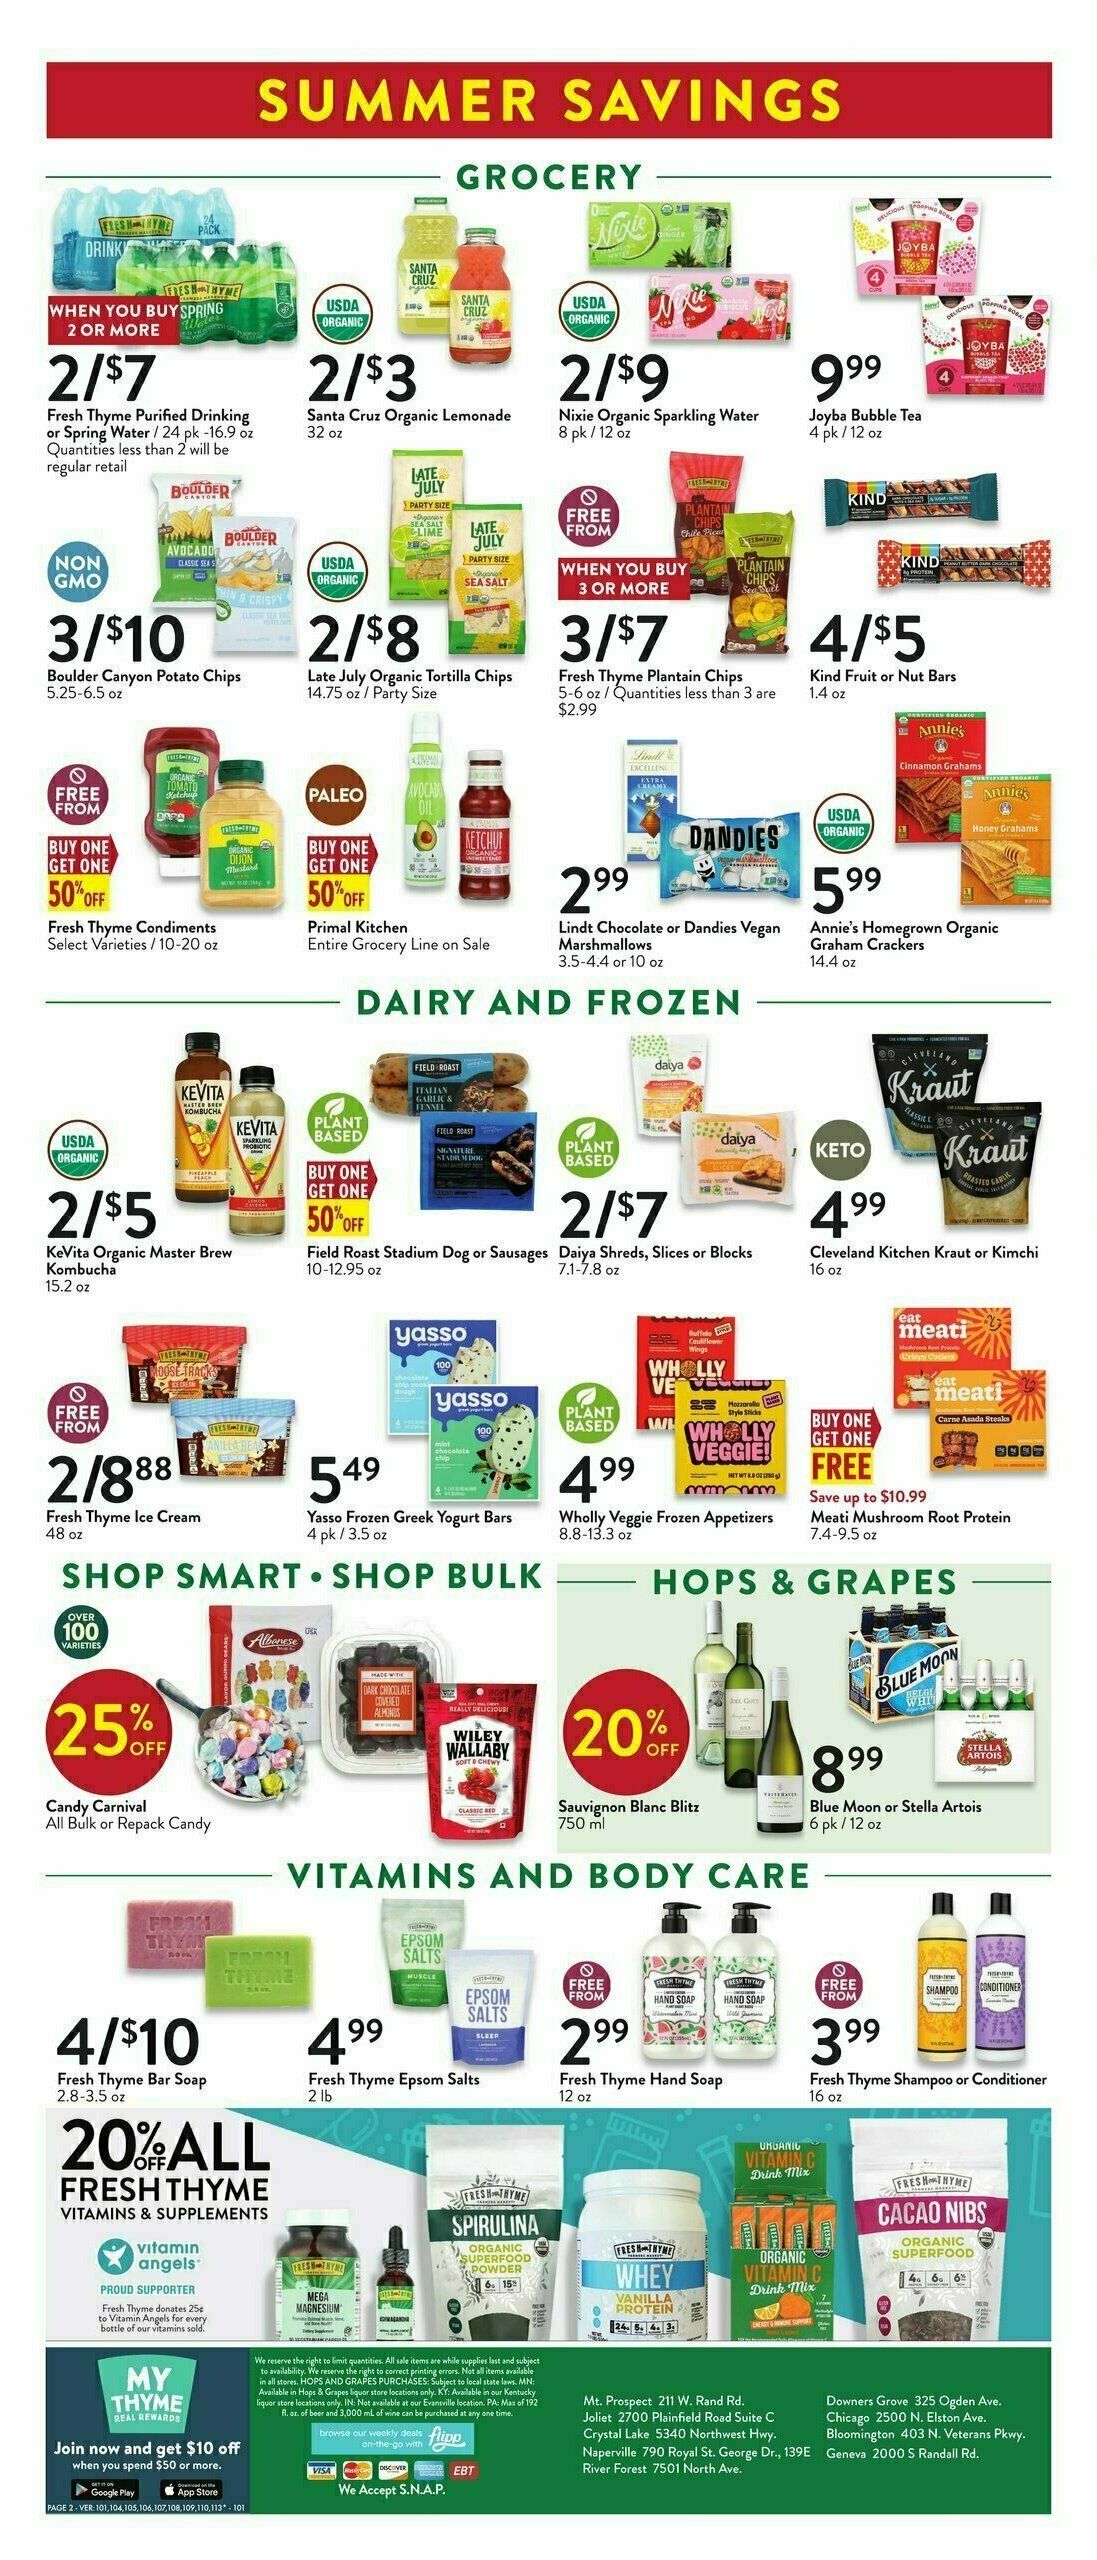 Fresh Thyme Farmers Market Weekly Ad from June 21